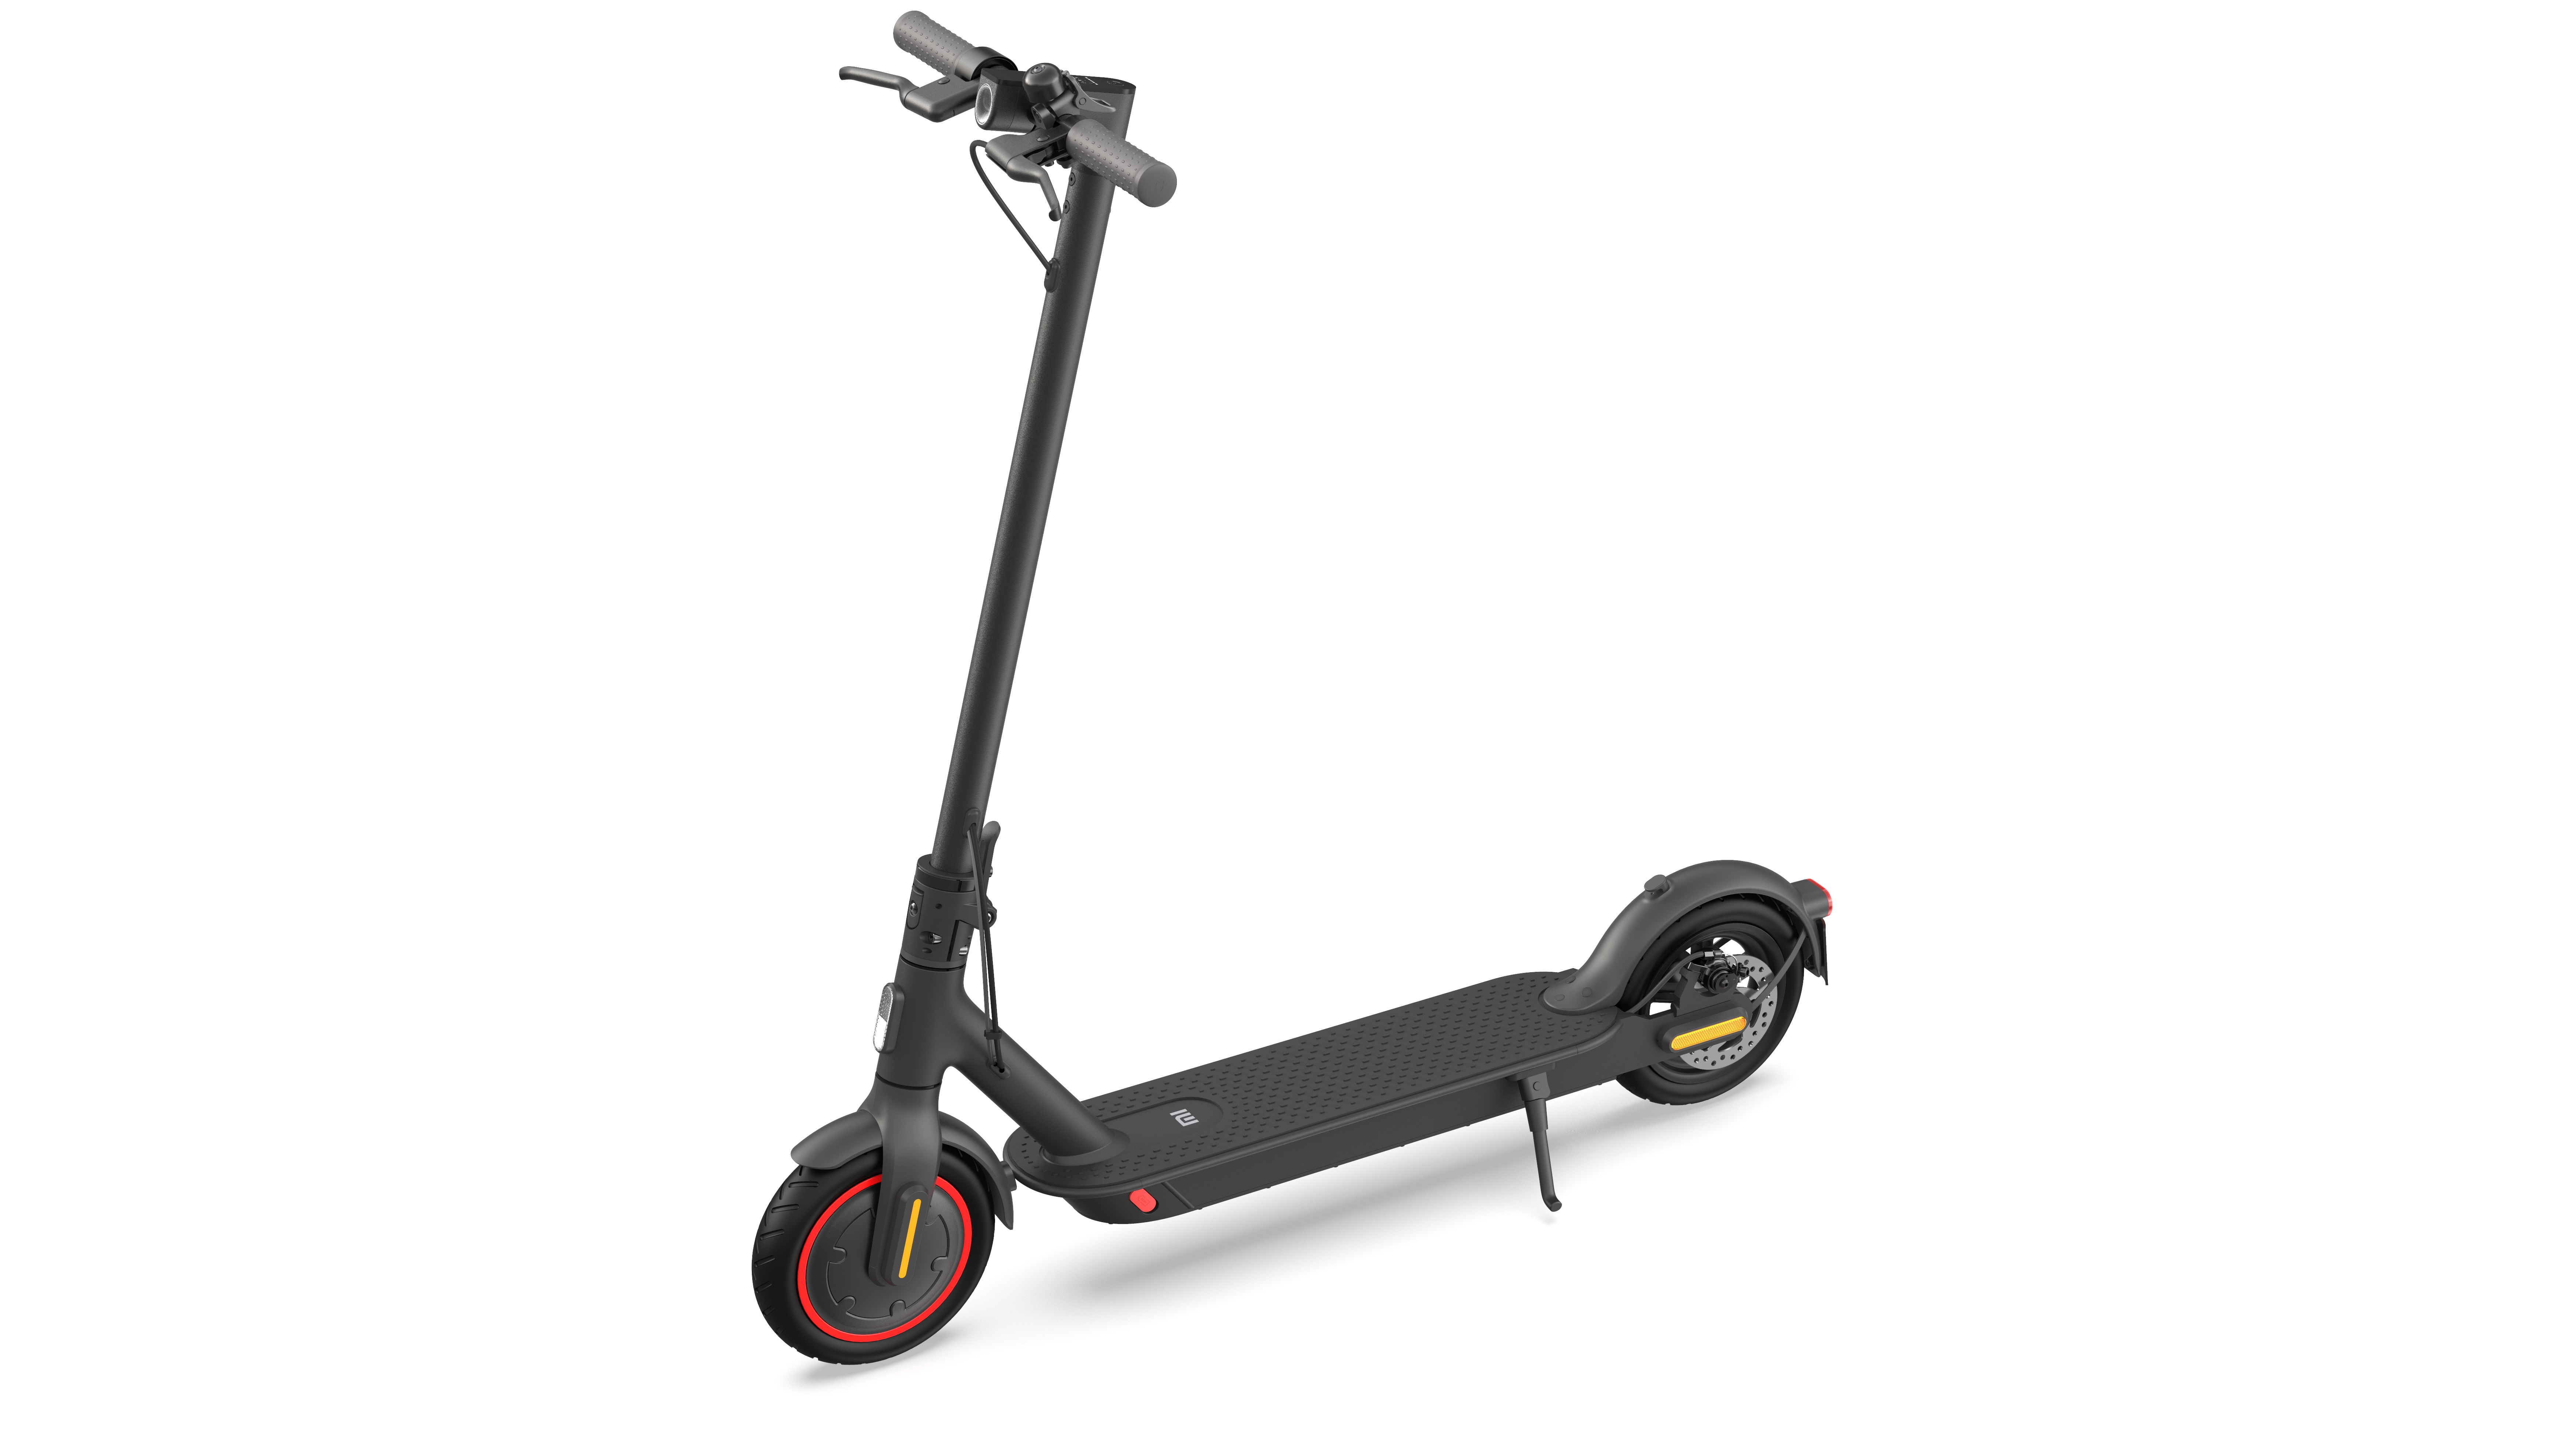 XIAOMI Mi Anthrazit) Pro E-Scooter 2 Zoll, Scooter (8,5 Electric